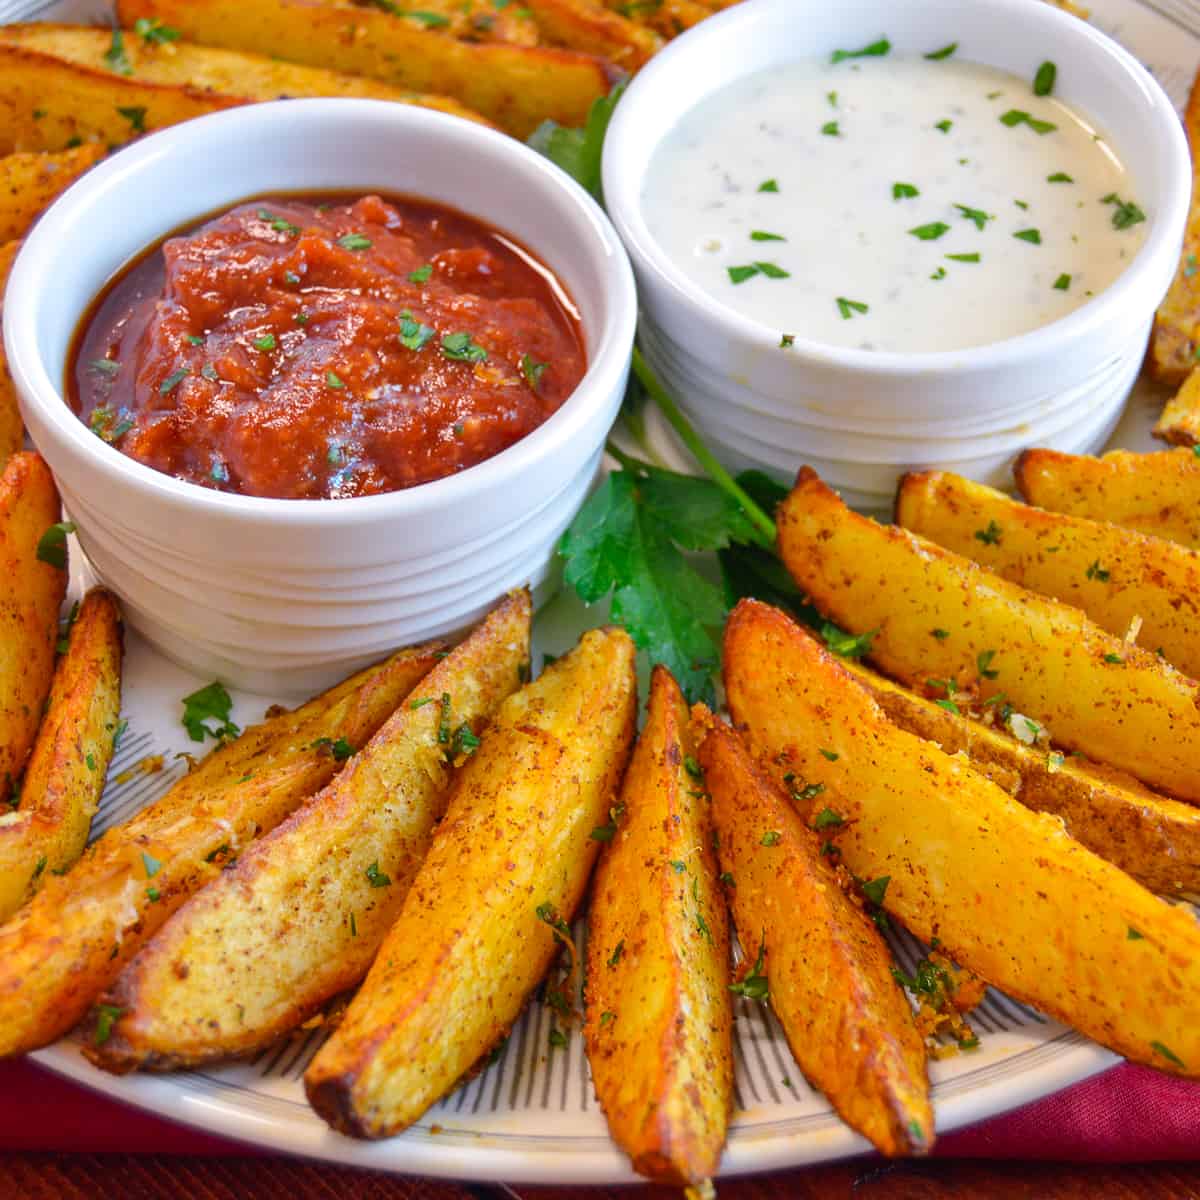 https://wholemadeliving.com/wp-content/uploads/2022/05/Air-Fryer-Potato-Wedges-3.jpg?ezimgfmt=ng%3Awebp%2Fngcb1%2Frs%3Adevice%2Frscb1-2